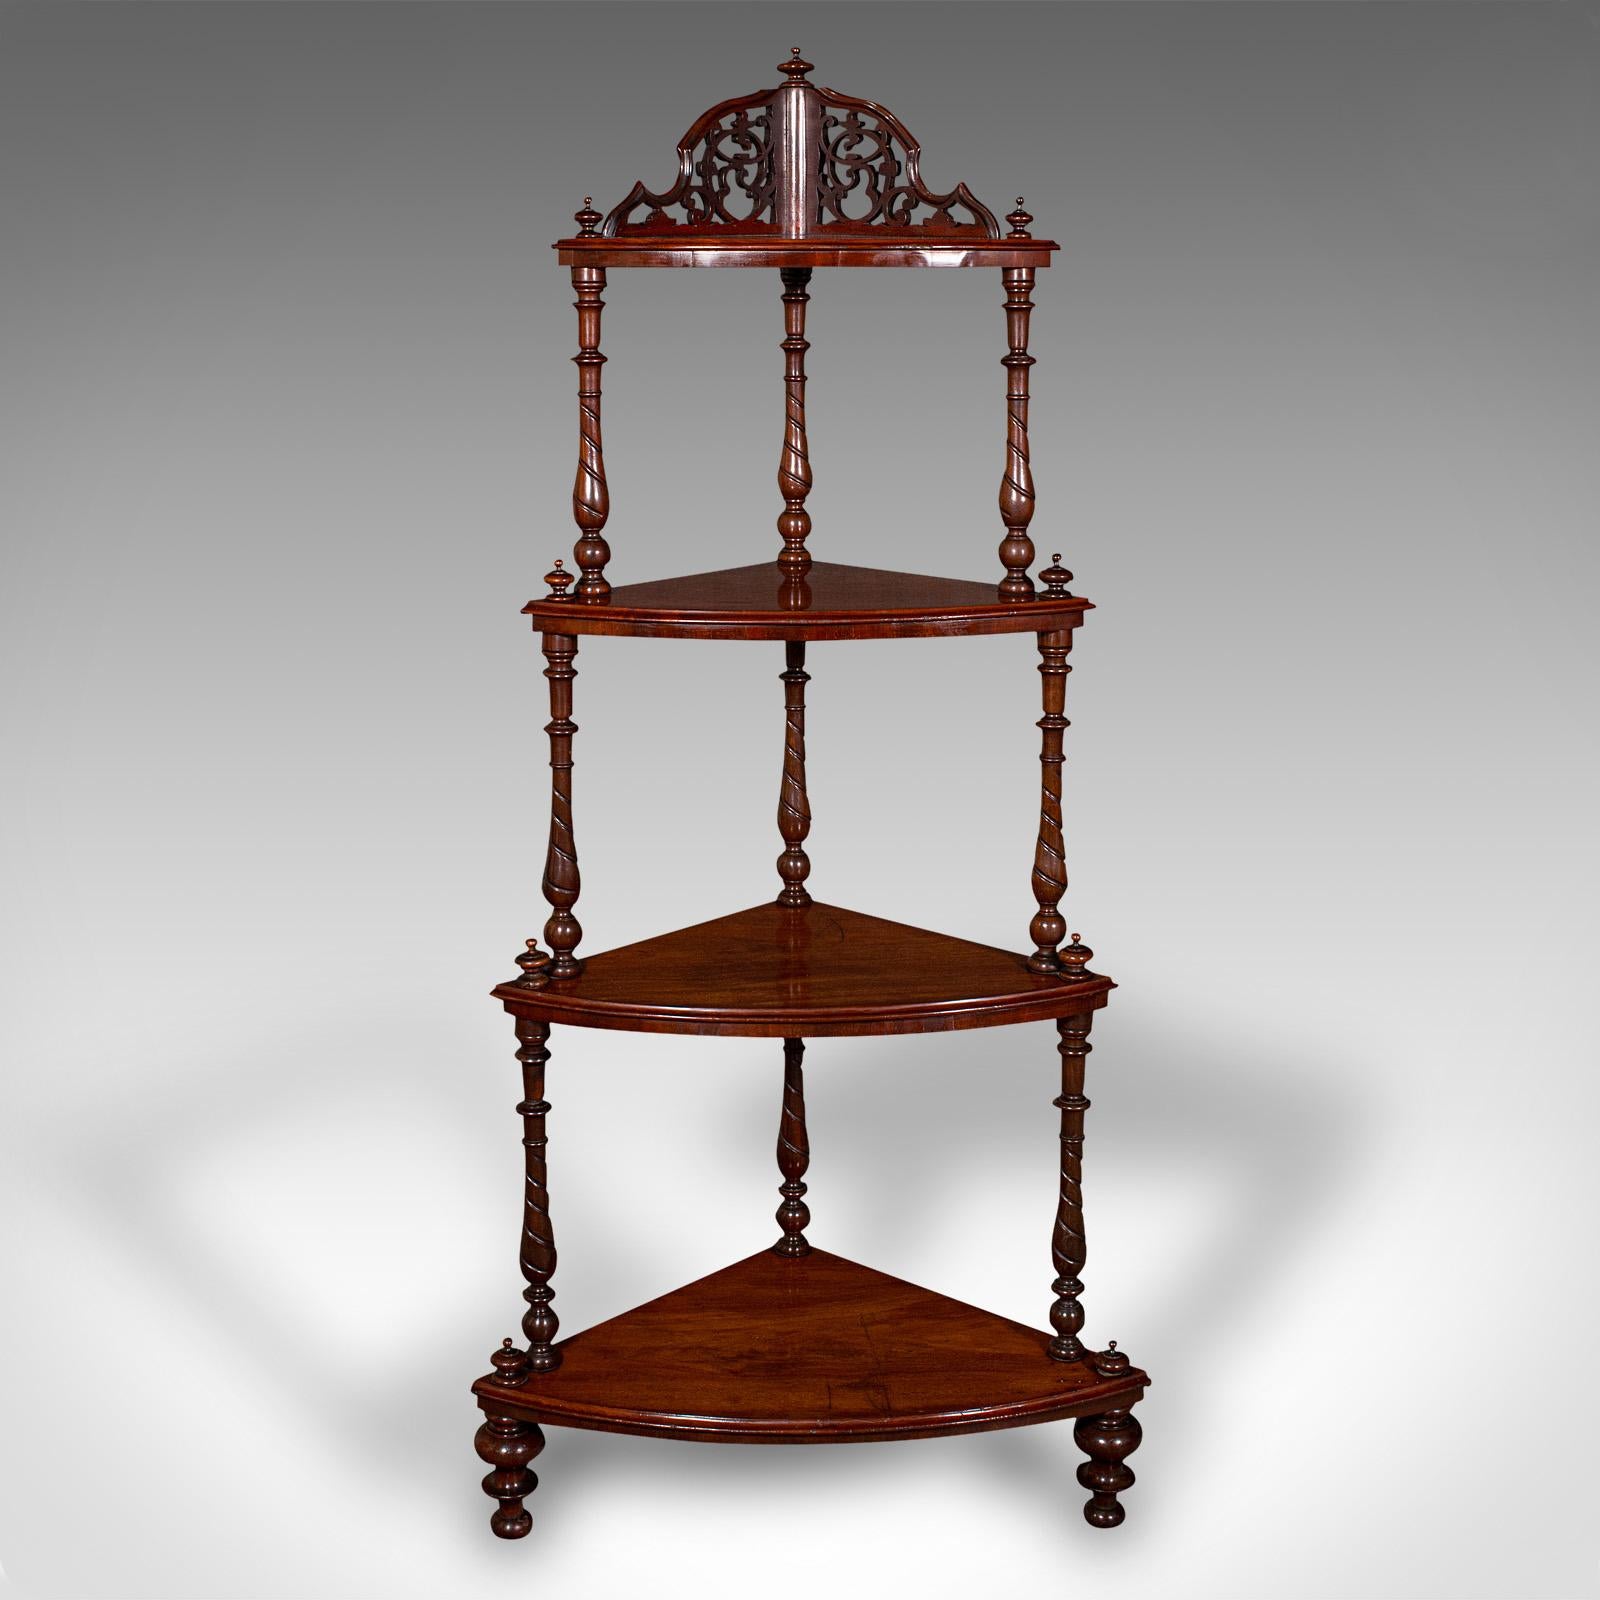 This is an antique corner whatnot. An English, walnut country house display stand, dating to the Victorian period, circa 1860.

Graceful cascading shape to this delightful corner stand
Displays a desirable aged patina and in good order
Select walnut